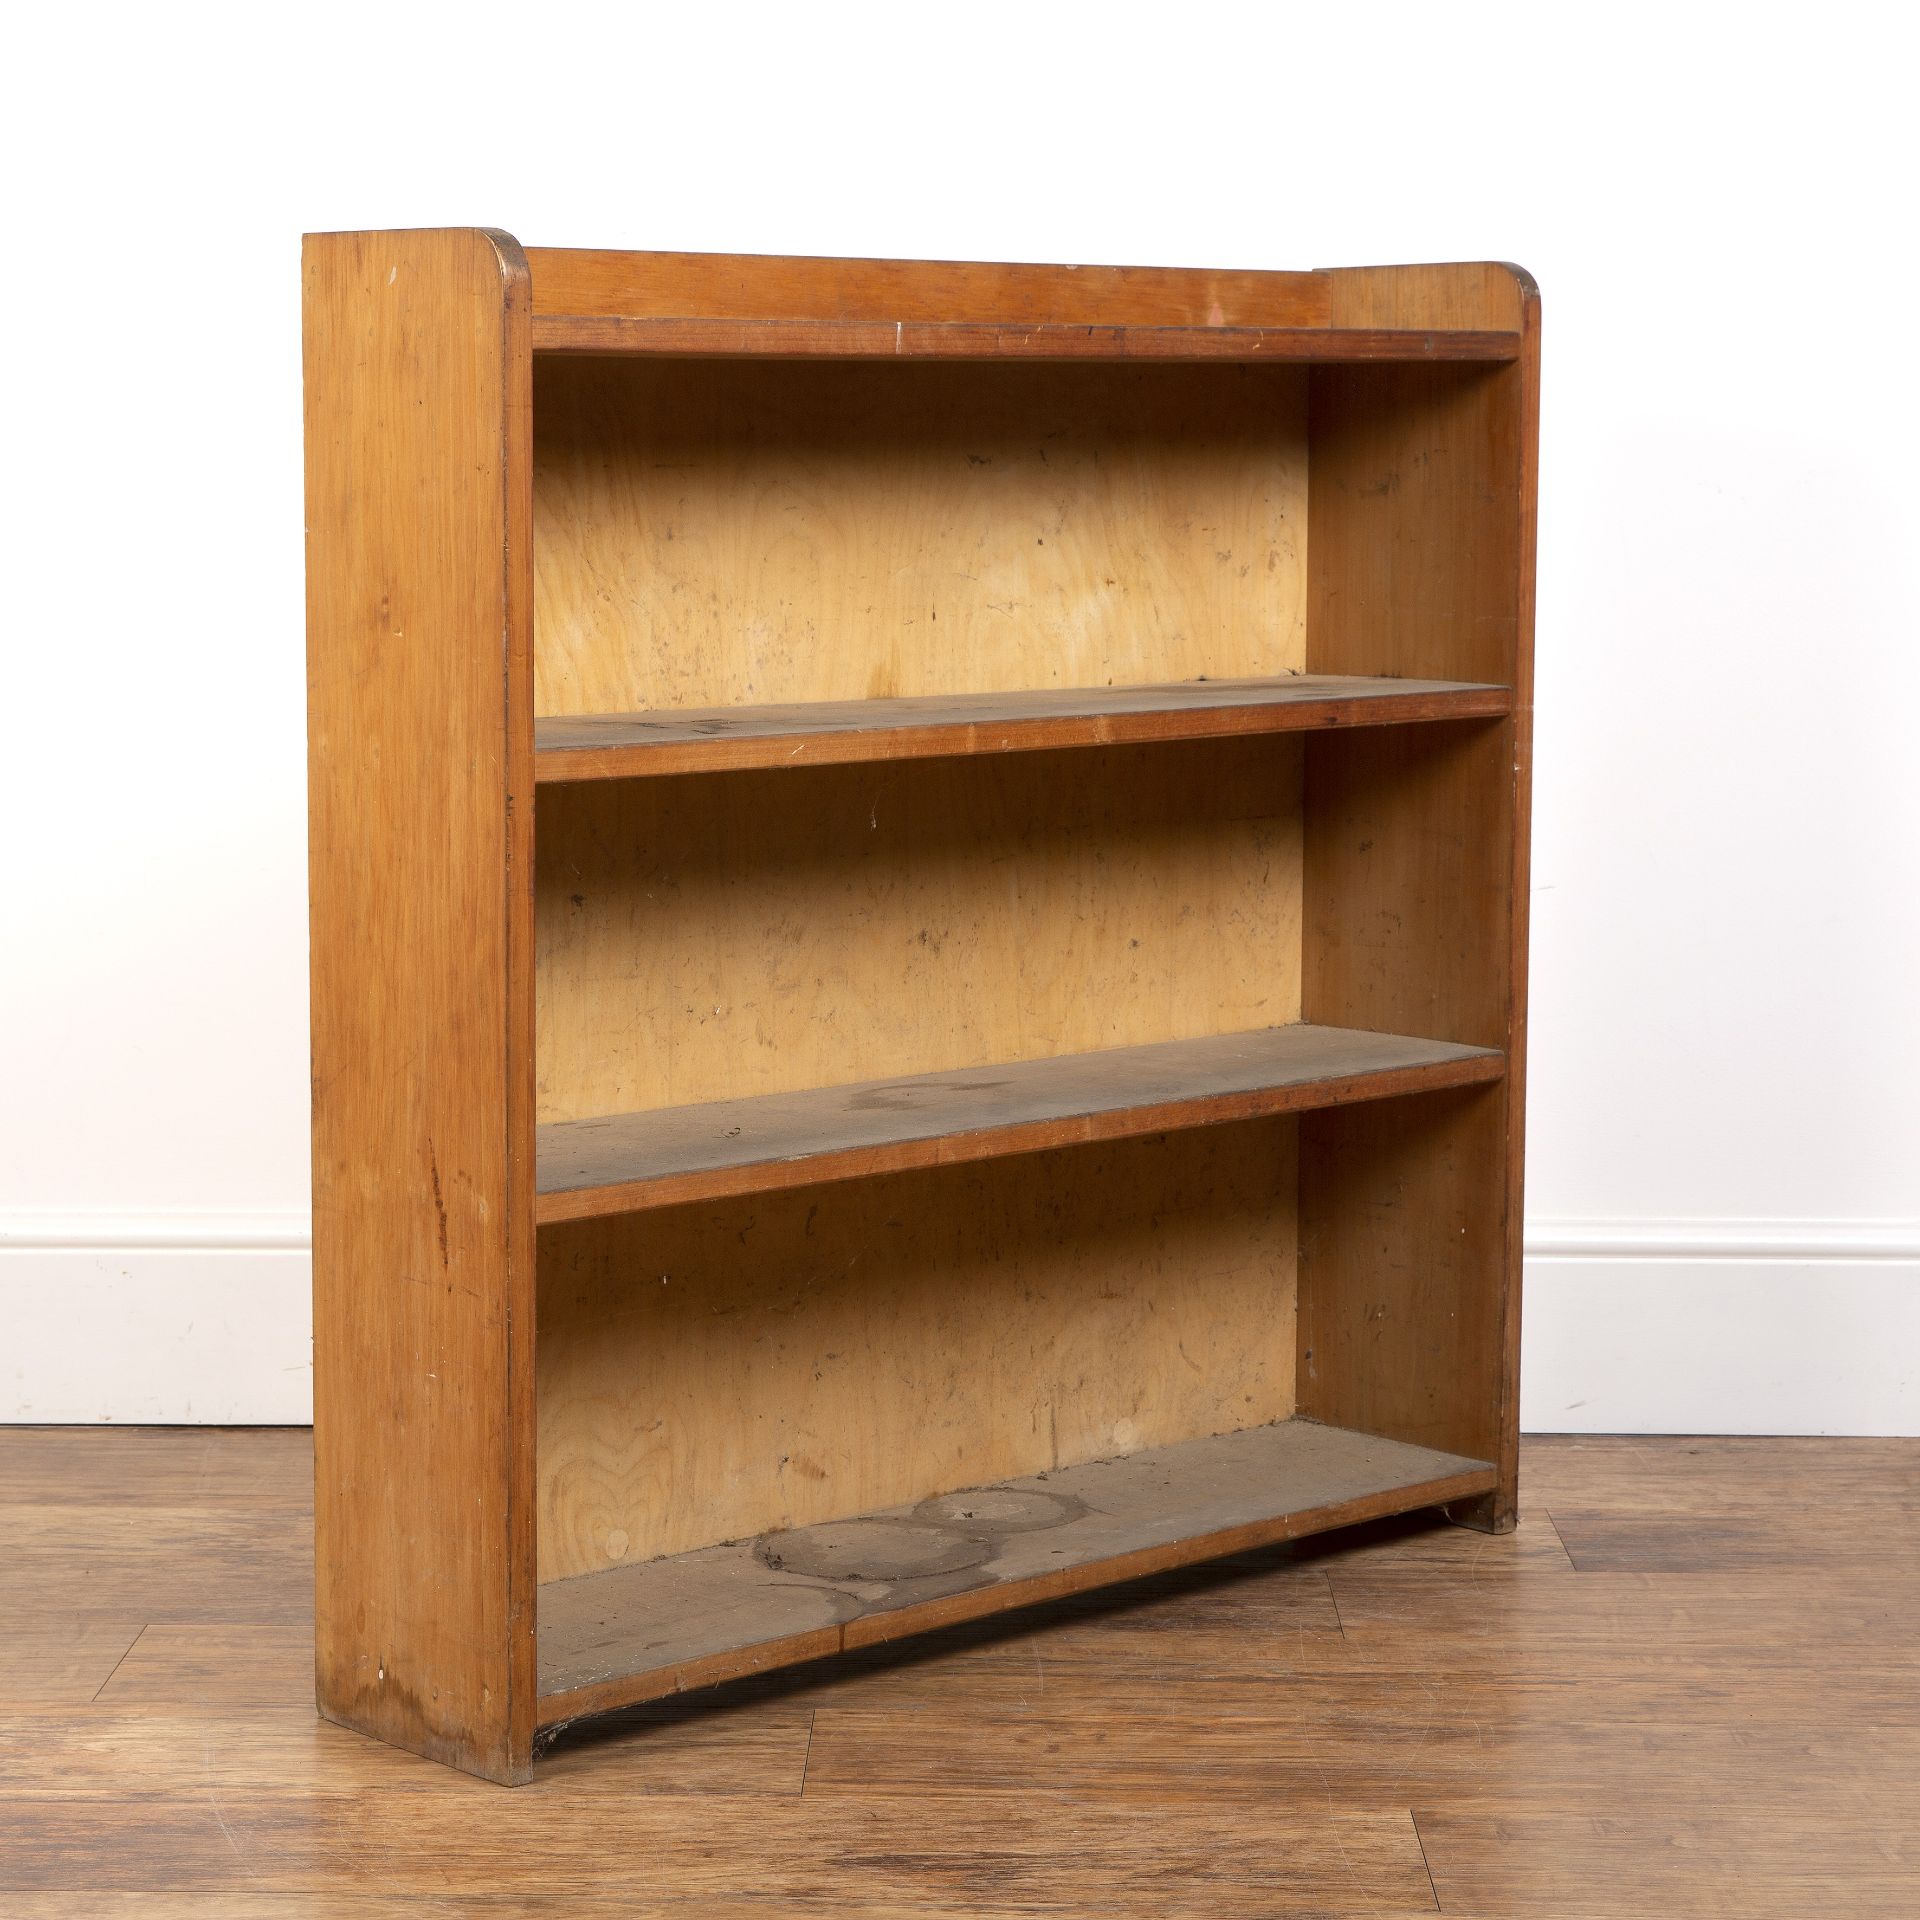 Cotswold School pine open bookcase, with fitted shelves, unmarked, 92cm wide x 91cm high x 20cm deep - Image 2 of 4